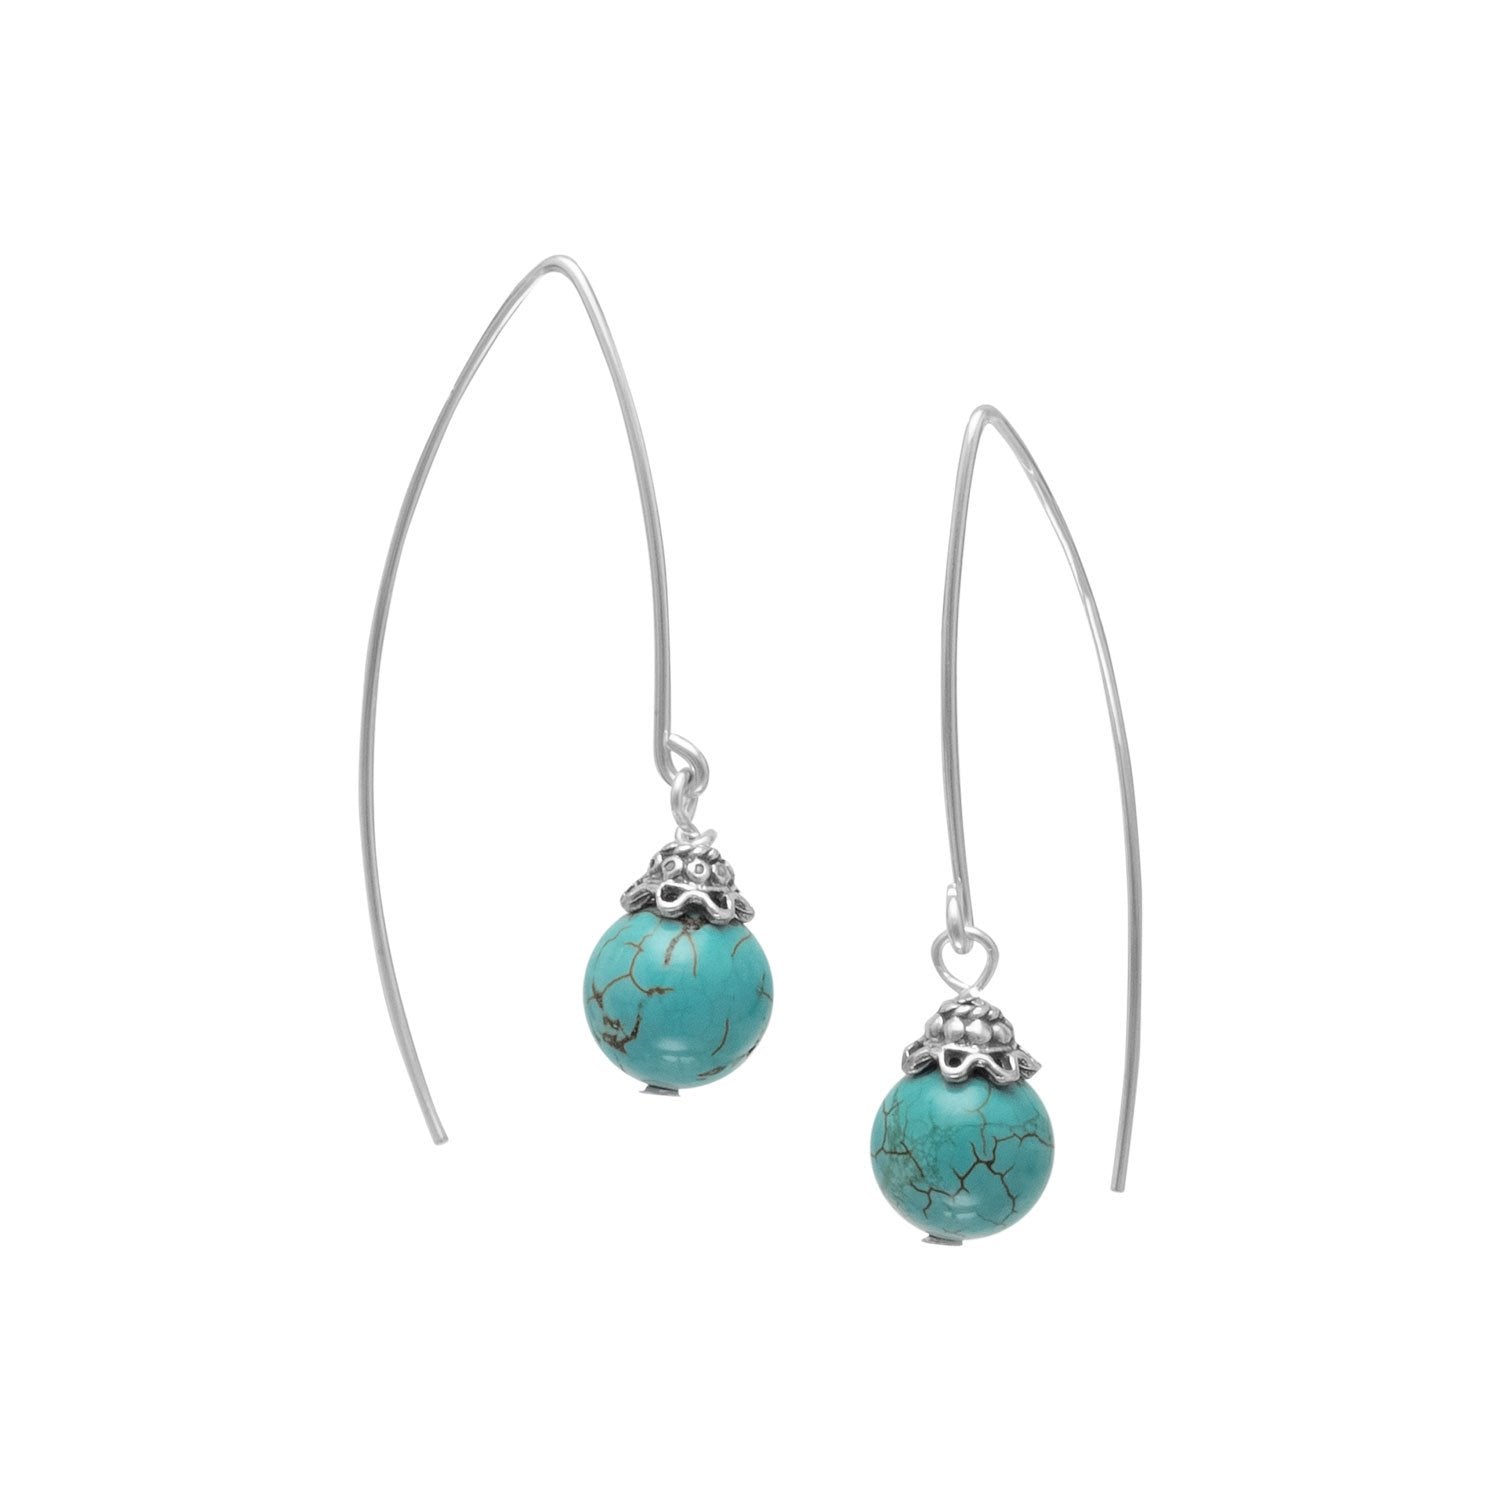 8mm Reconstituted Turquoise Bead Long Wire Earrings - Joyeria Lady